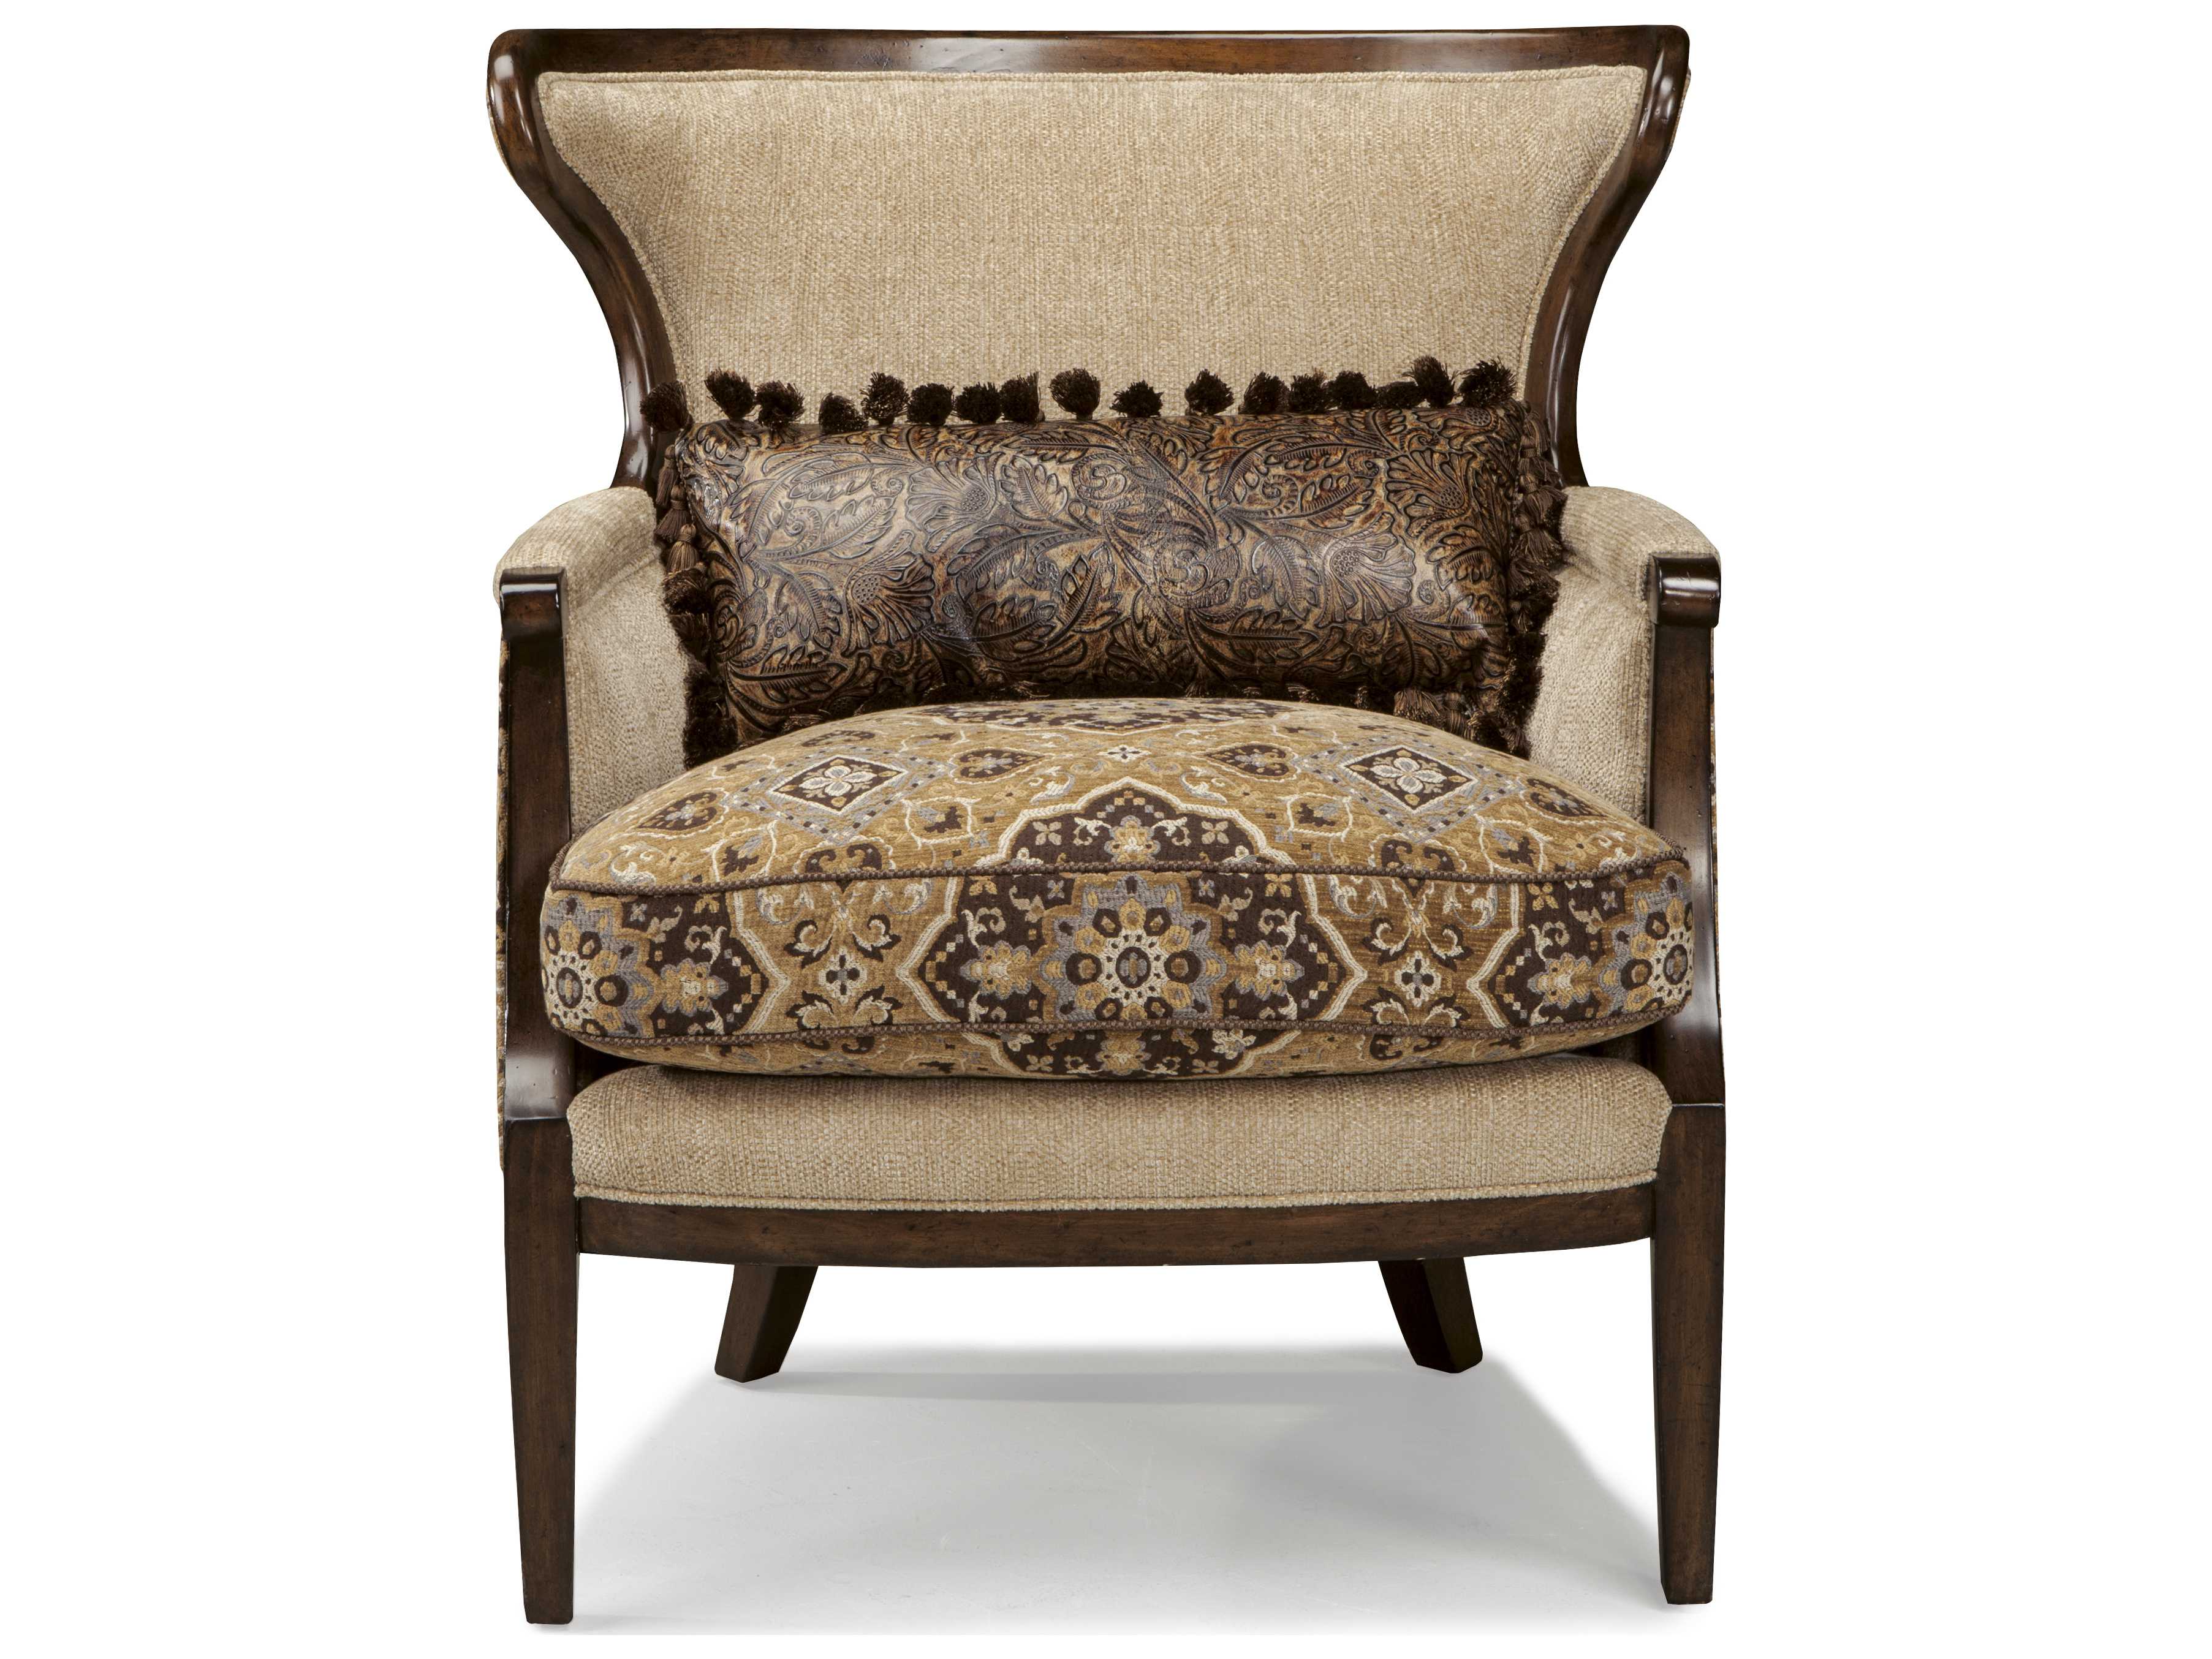 Rustic Accent Chair For Living Room